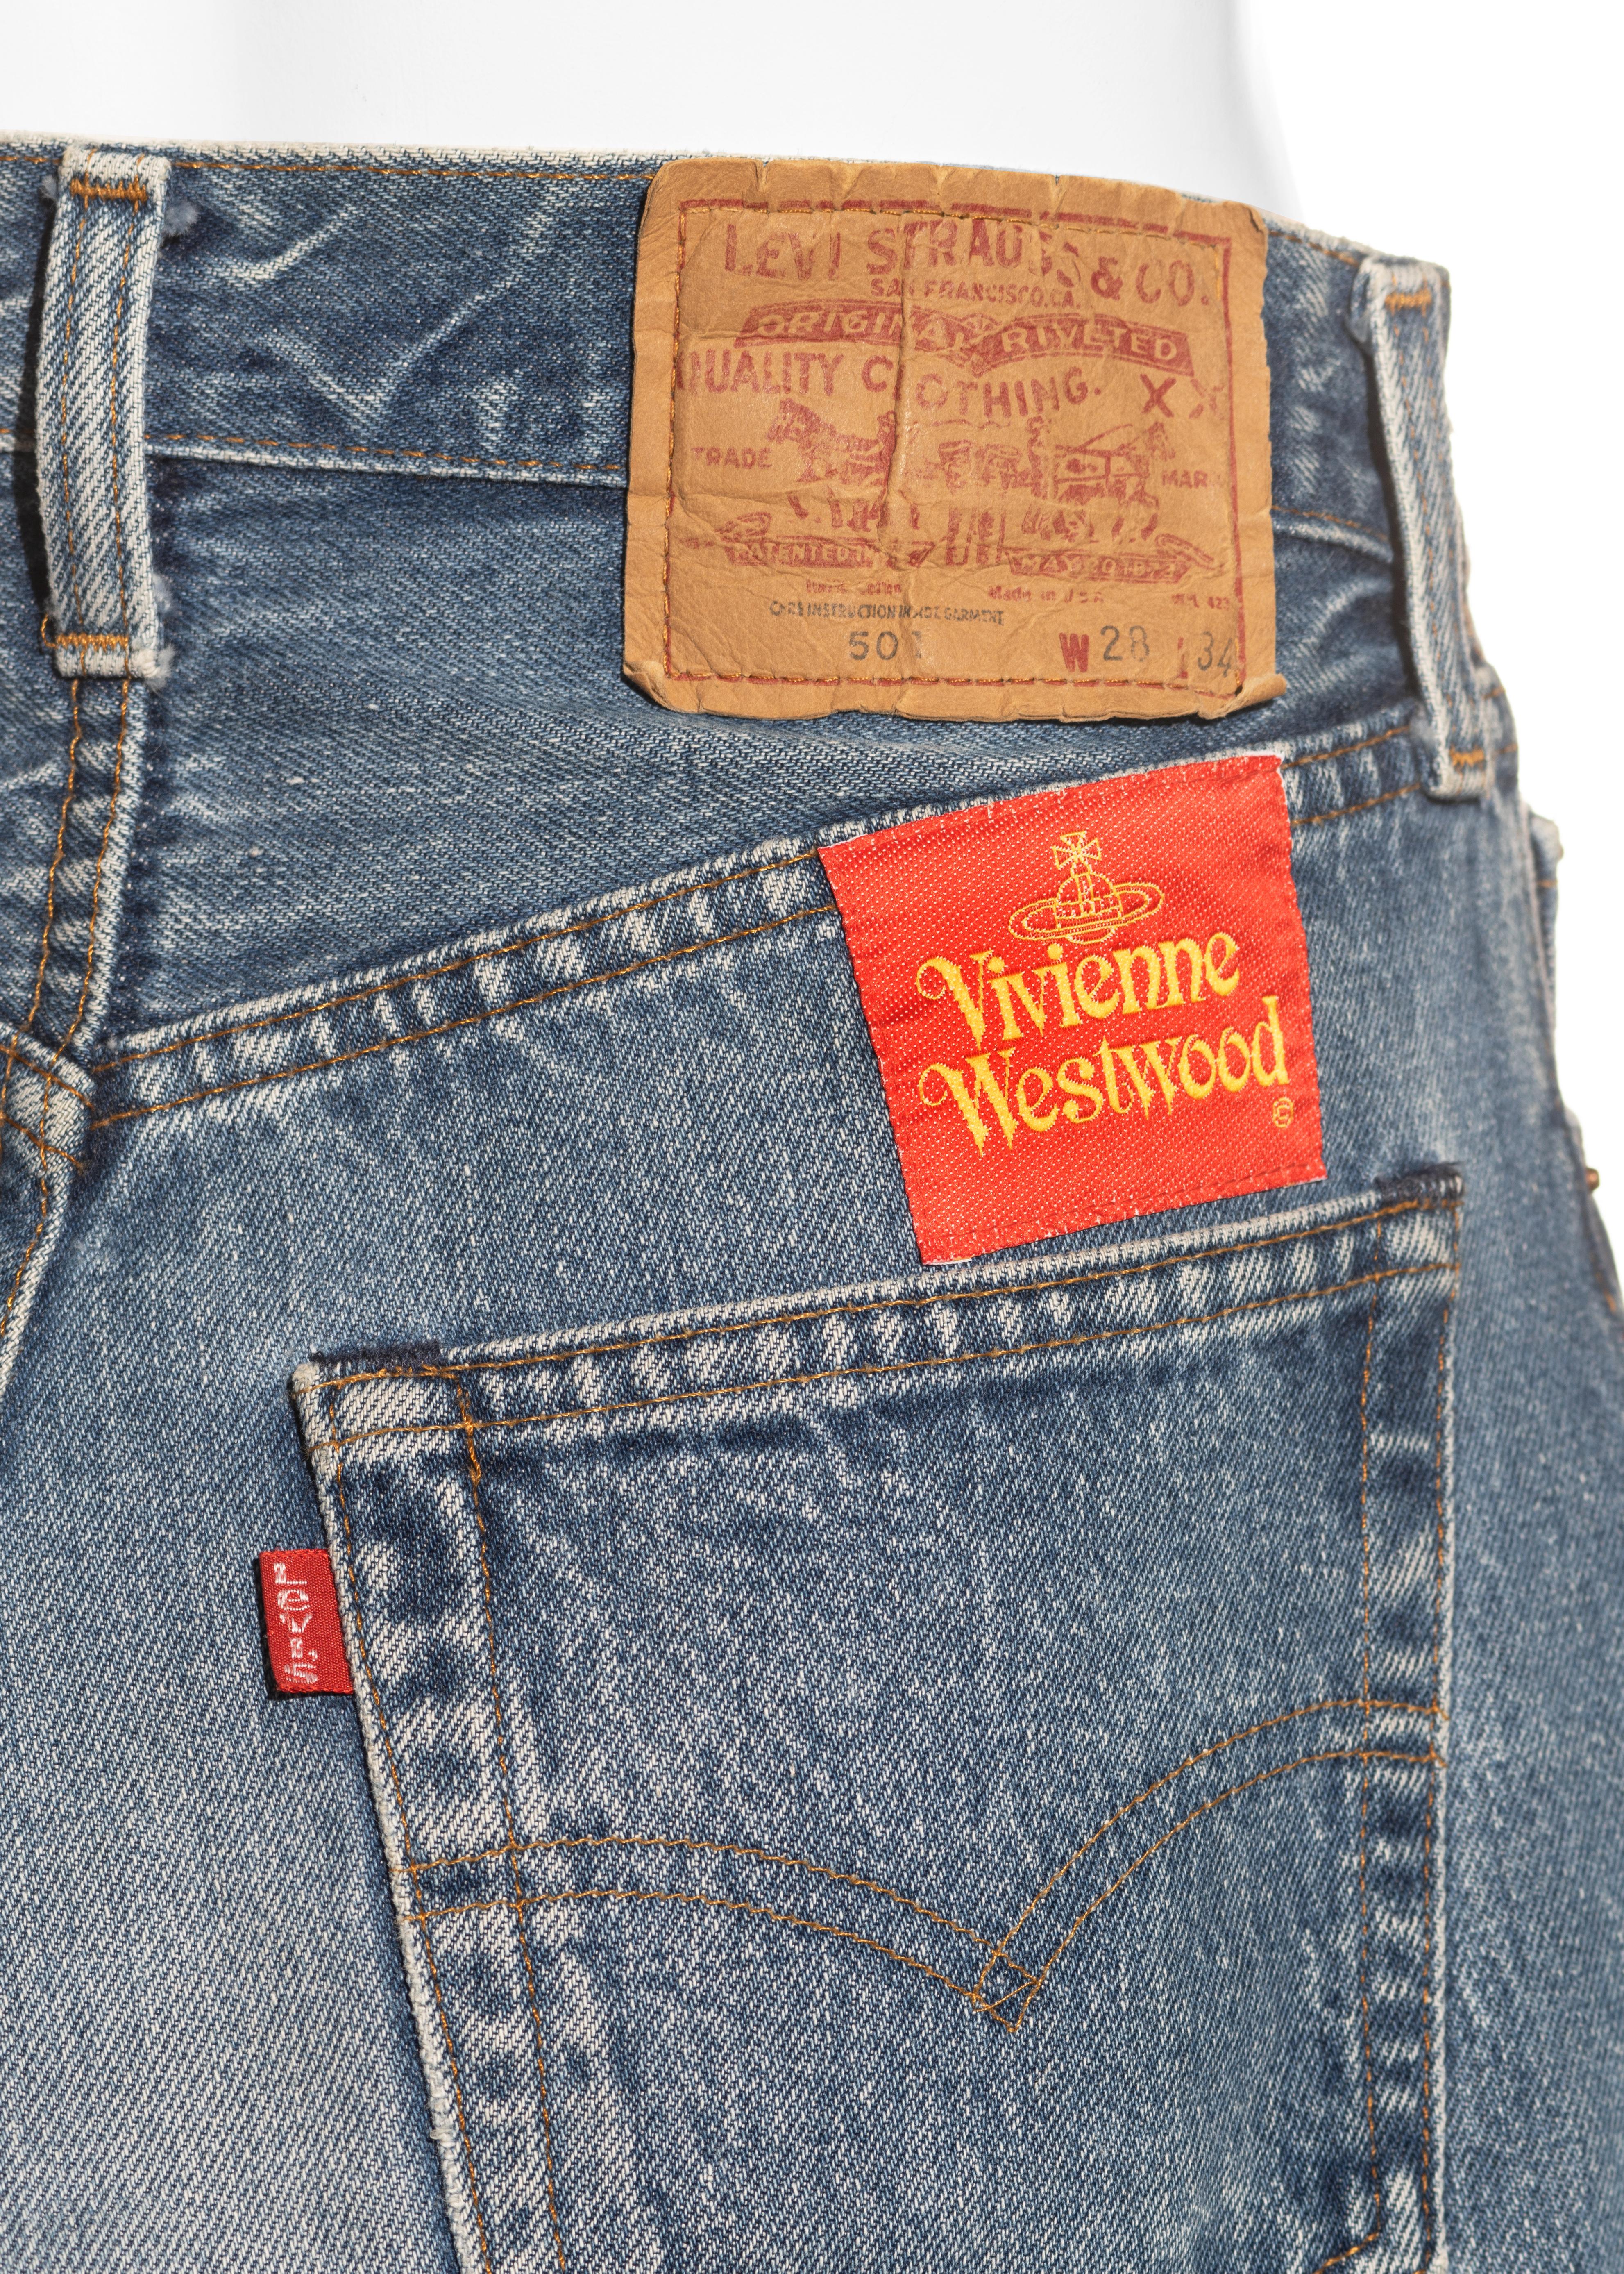 Vivienne Westwood denim 'Mini-Crini' skirt, ss 1985 In Excellent Condition For Sale In London, GB